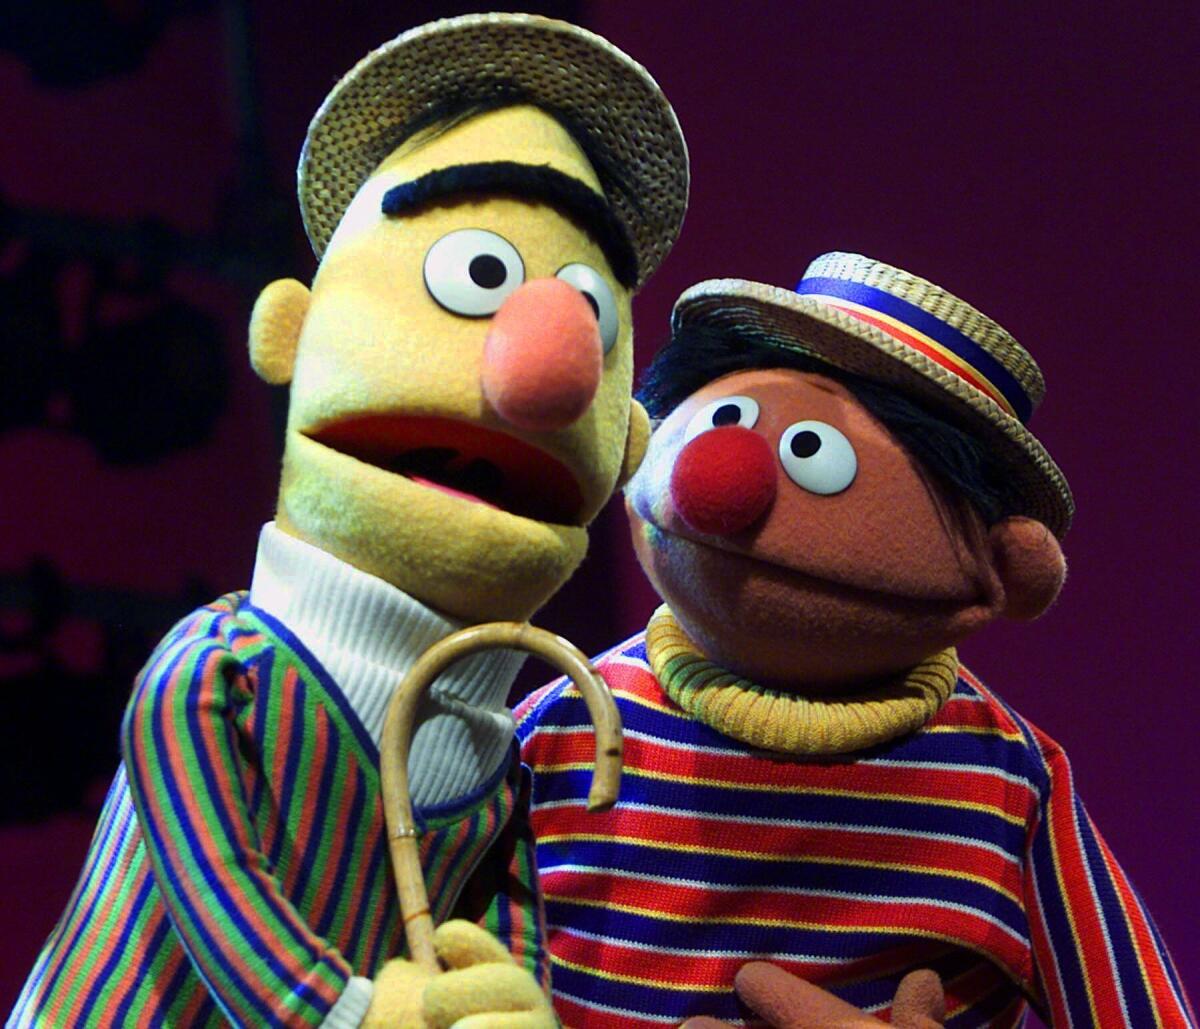 Muppets Bert and Ernie perform on "Sesame Street," one of HBO's new original programming affiliations trumpeted by Time Warner CEO Jeff Bewkes.